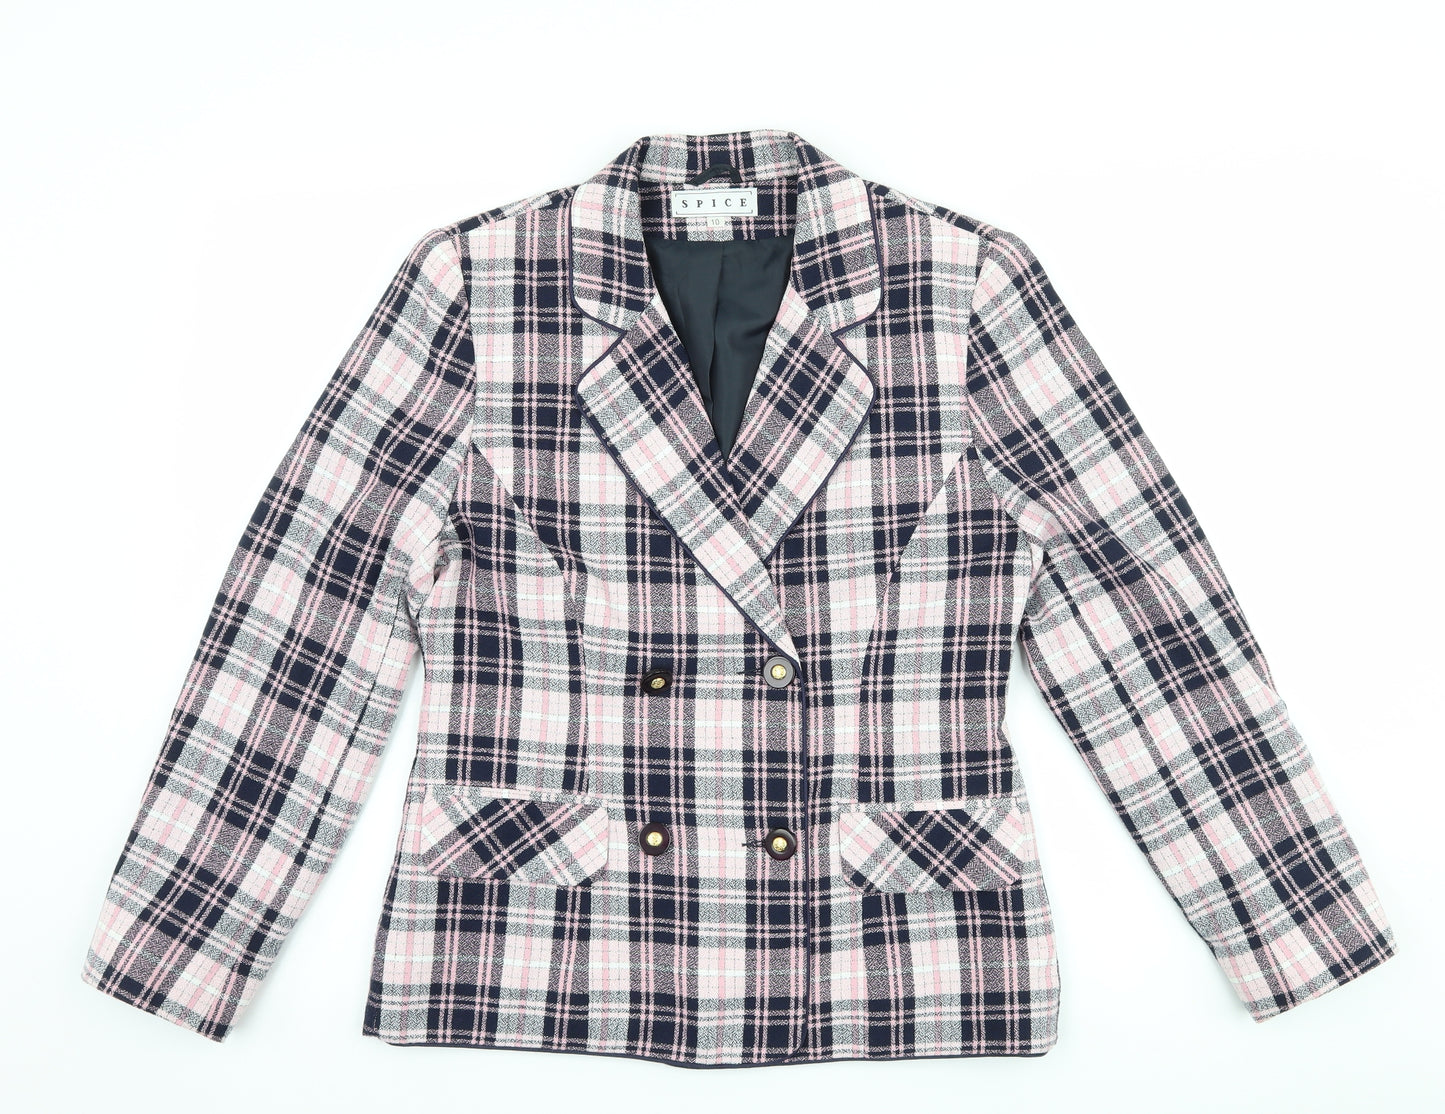 Spice Womens Pink Check  Jacket Suit Jacket Size 10